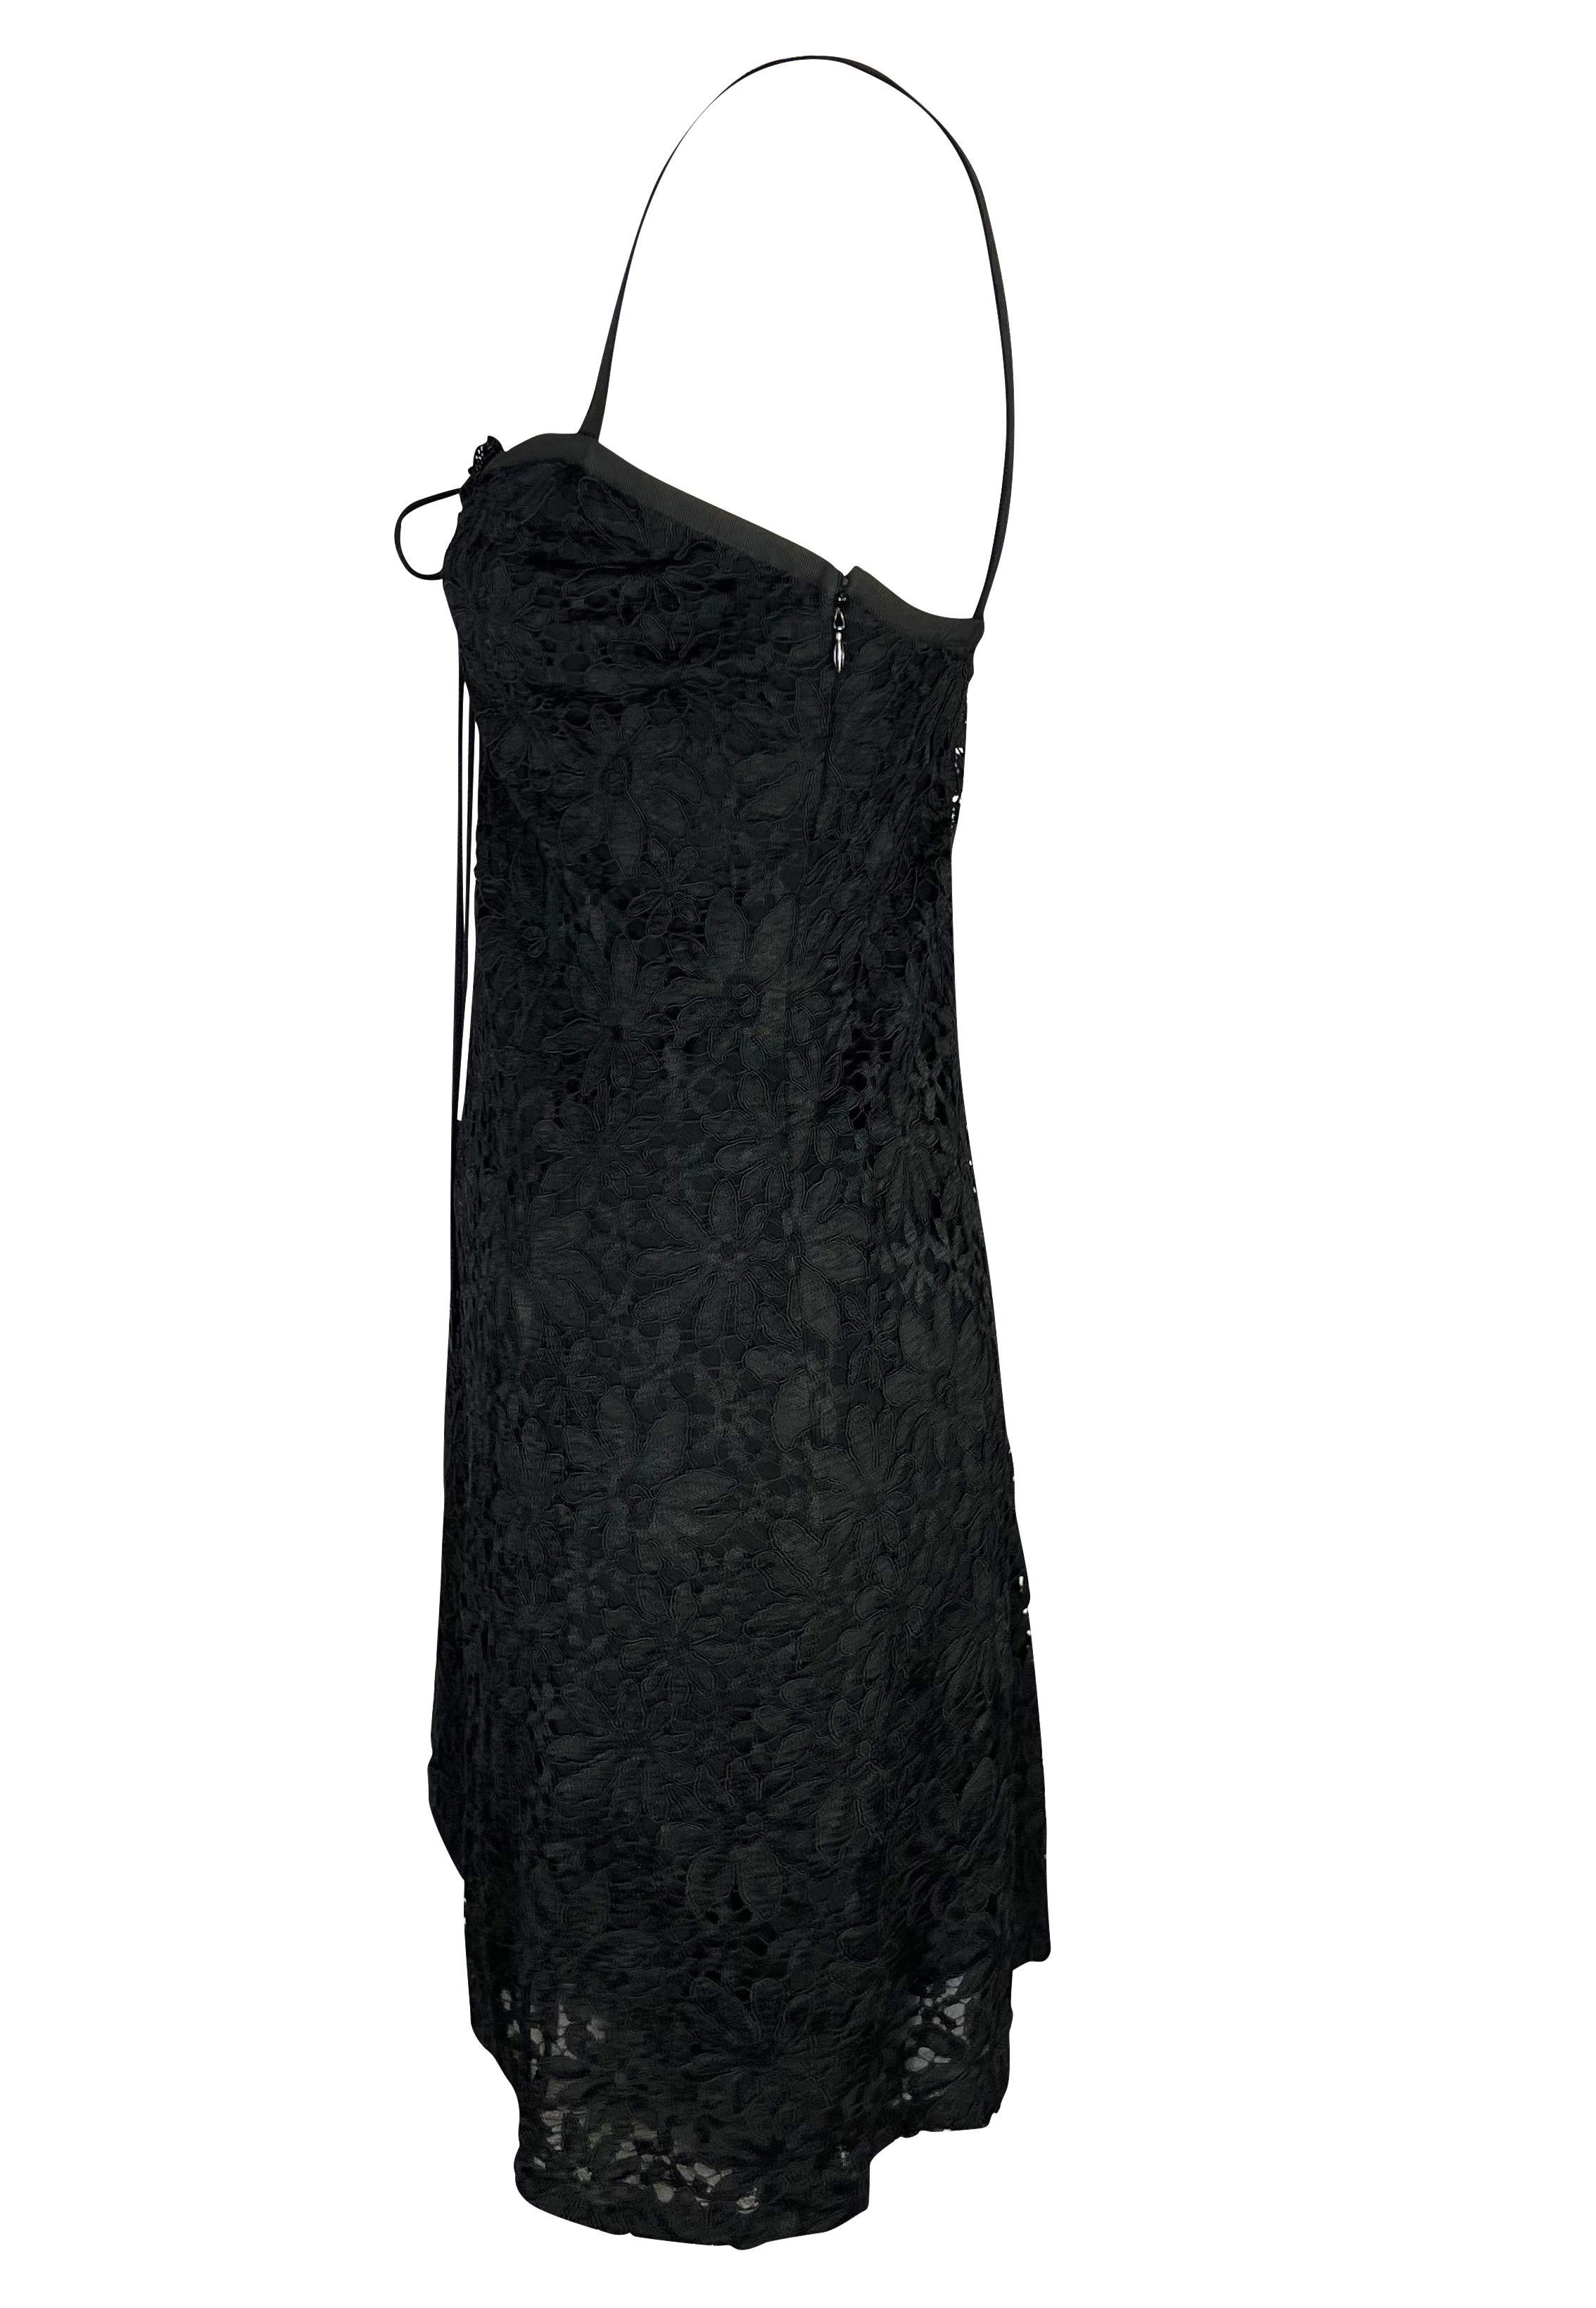 Early 1990s Yves Saint Laurent Rive Gauche Lace-Up Black Sheer Lace Mini Dress In Good Condition For Sale In West Hollywood, CA